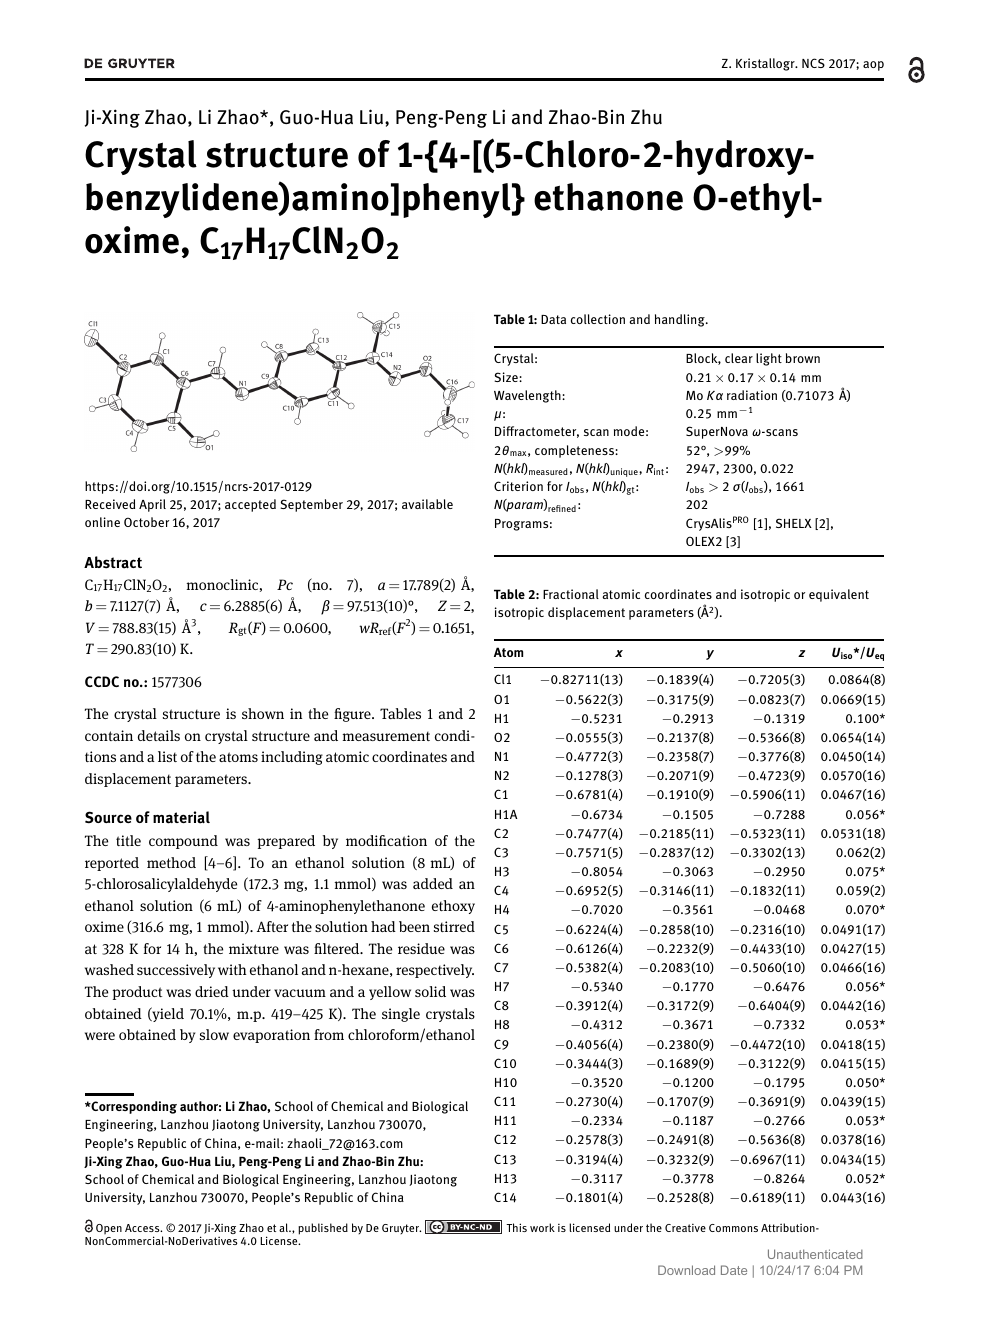 Crystal Structure Of 1 4 5 Chloro 2 Hydroxy Benzylidene Amino Phenyl Ethanone O Ethyl Oxime C17h17cln2o2 Topic Of Research Paper In Chemical Sciences Download Scholarly Article Pdf And Read For Free On Cyberleninka Open Science Hub